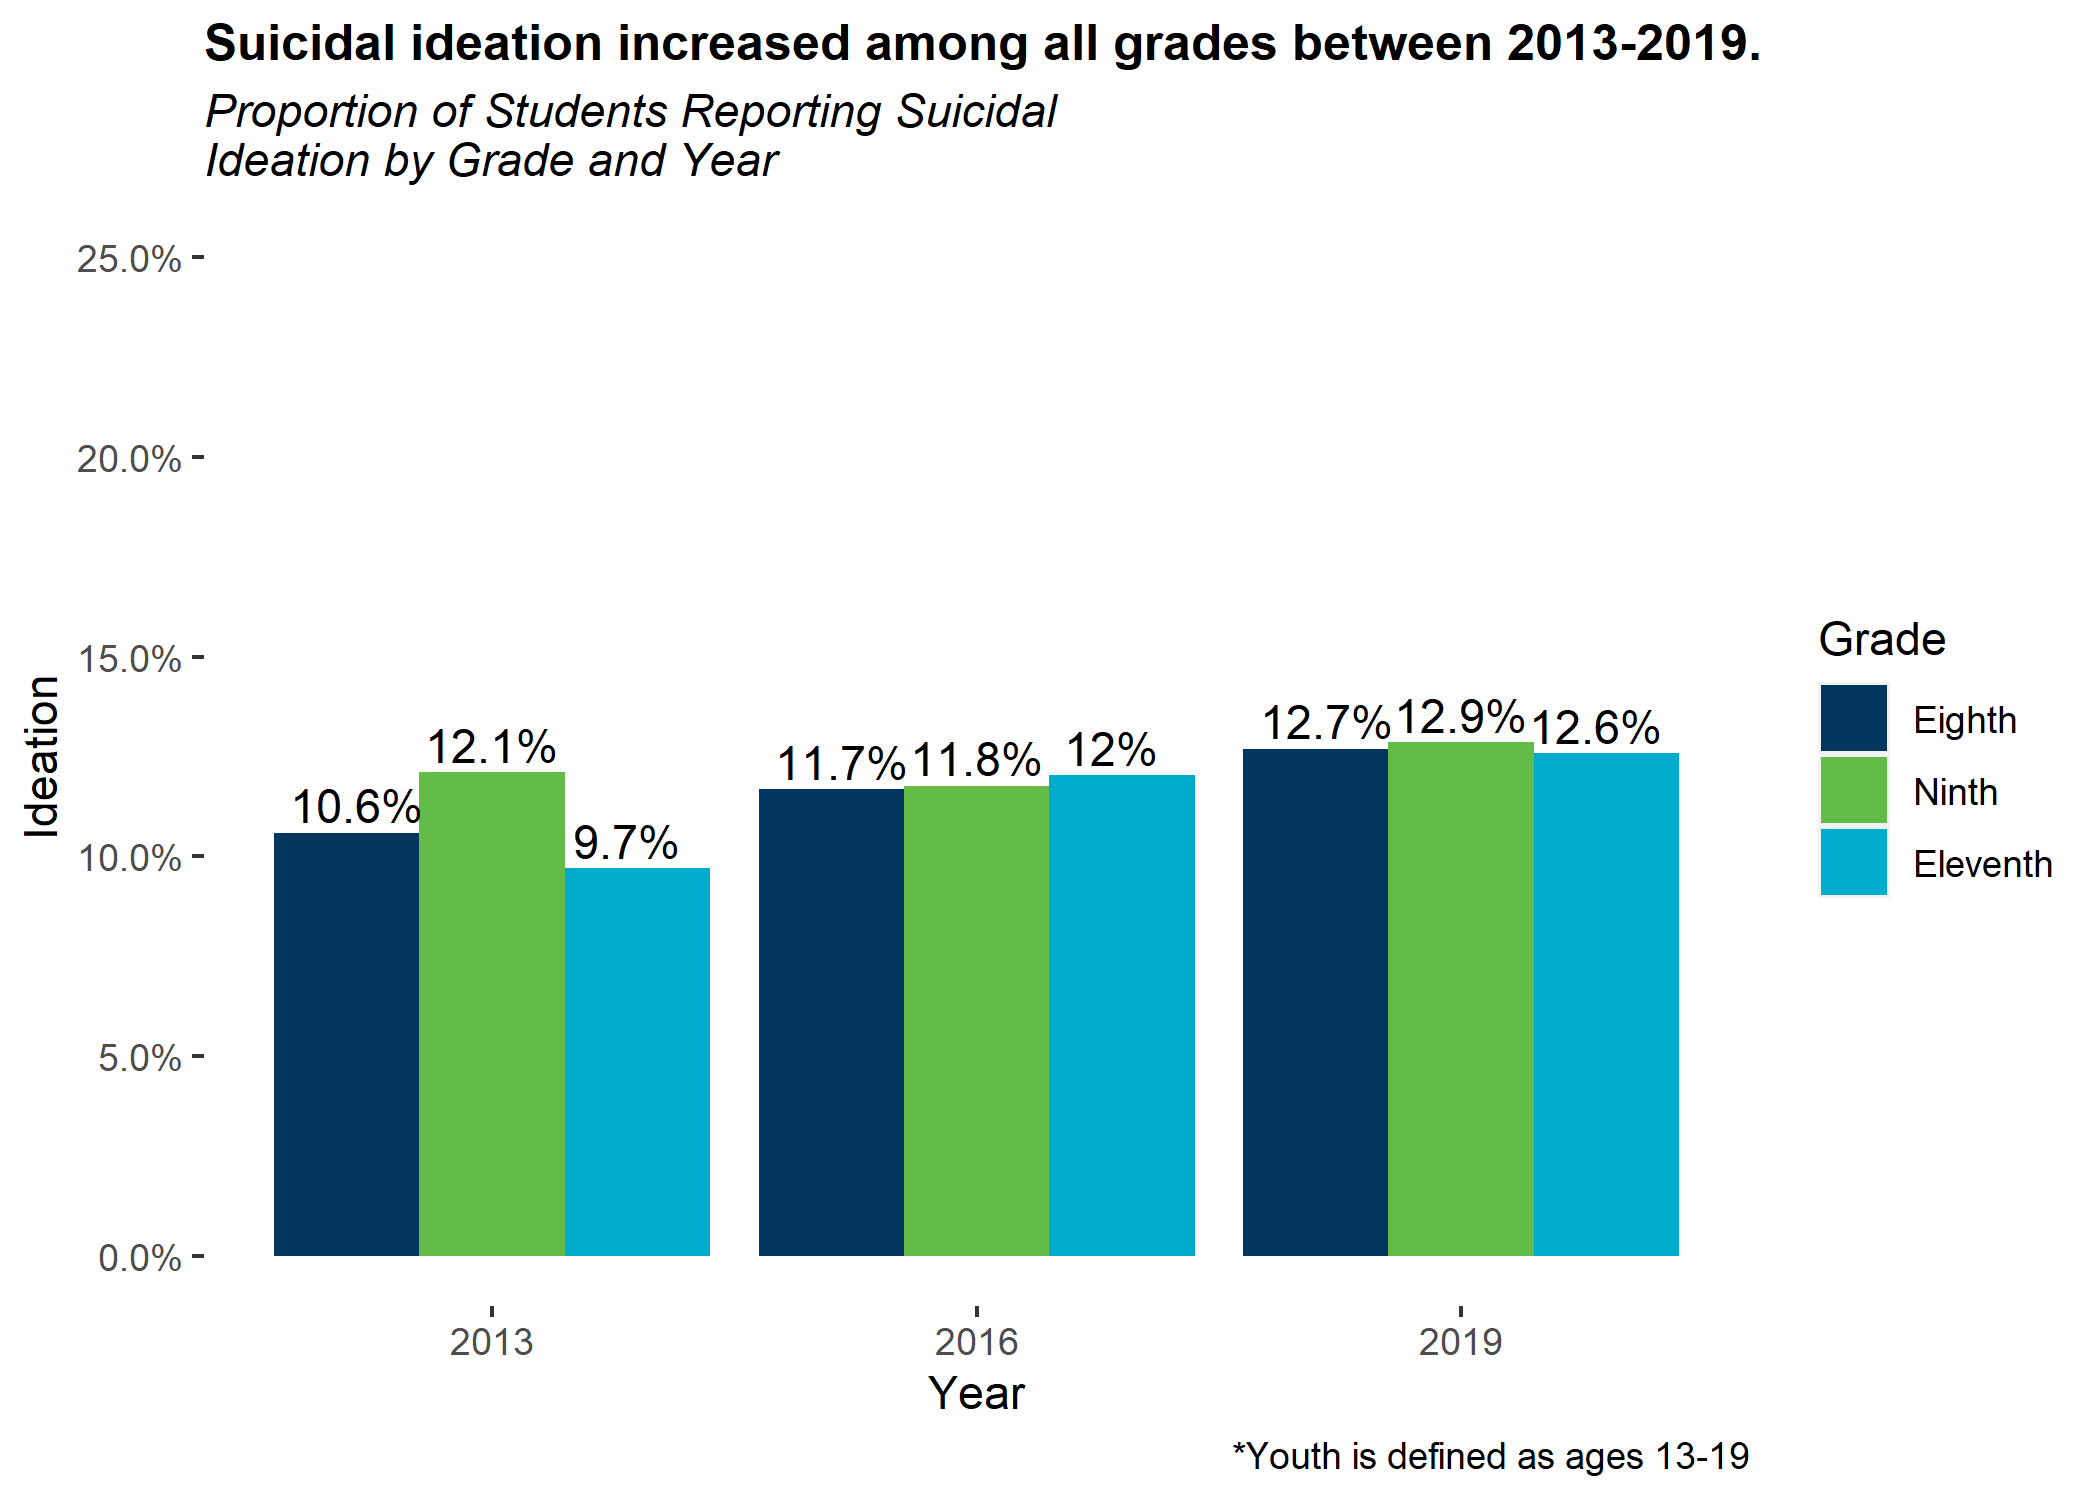 proportion of students reporting suicidal ideation by grade and year
Suicidal ideation increased among all grades between 2013-2019